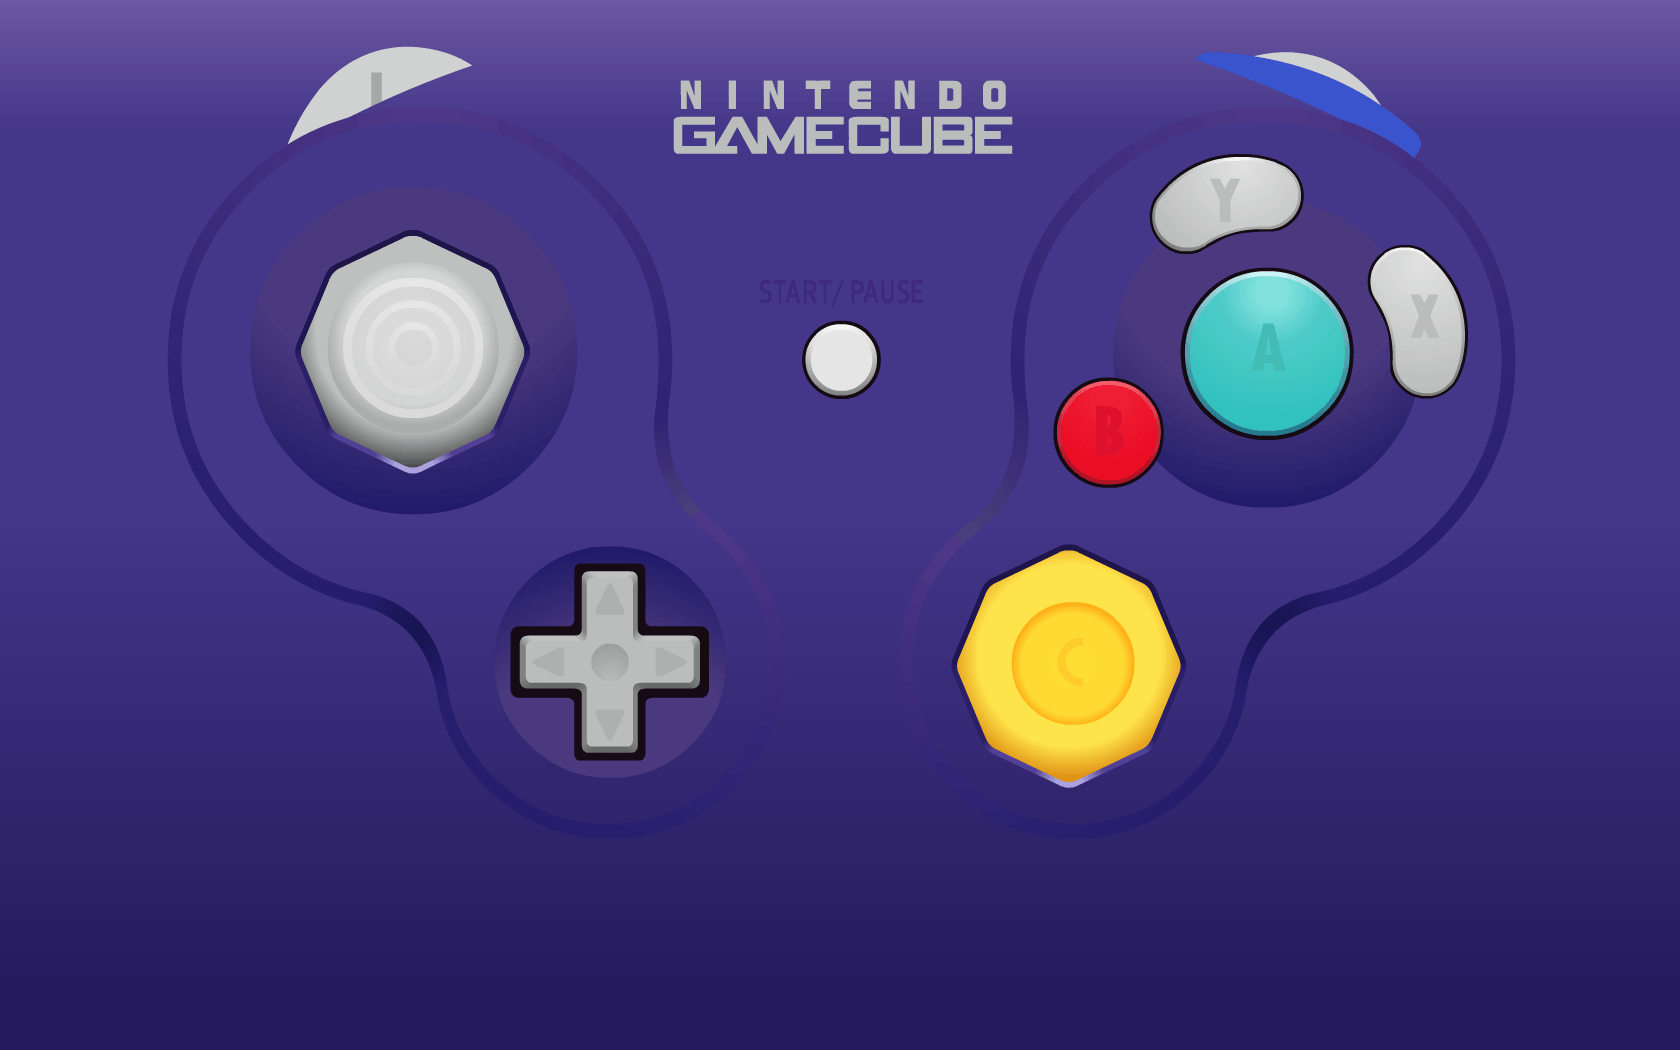 Got bored at work today Made this wallpaper  rGamecube